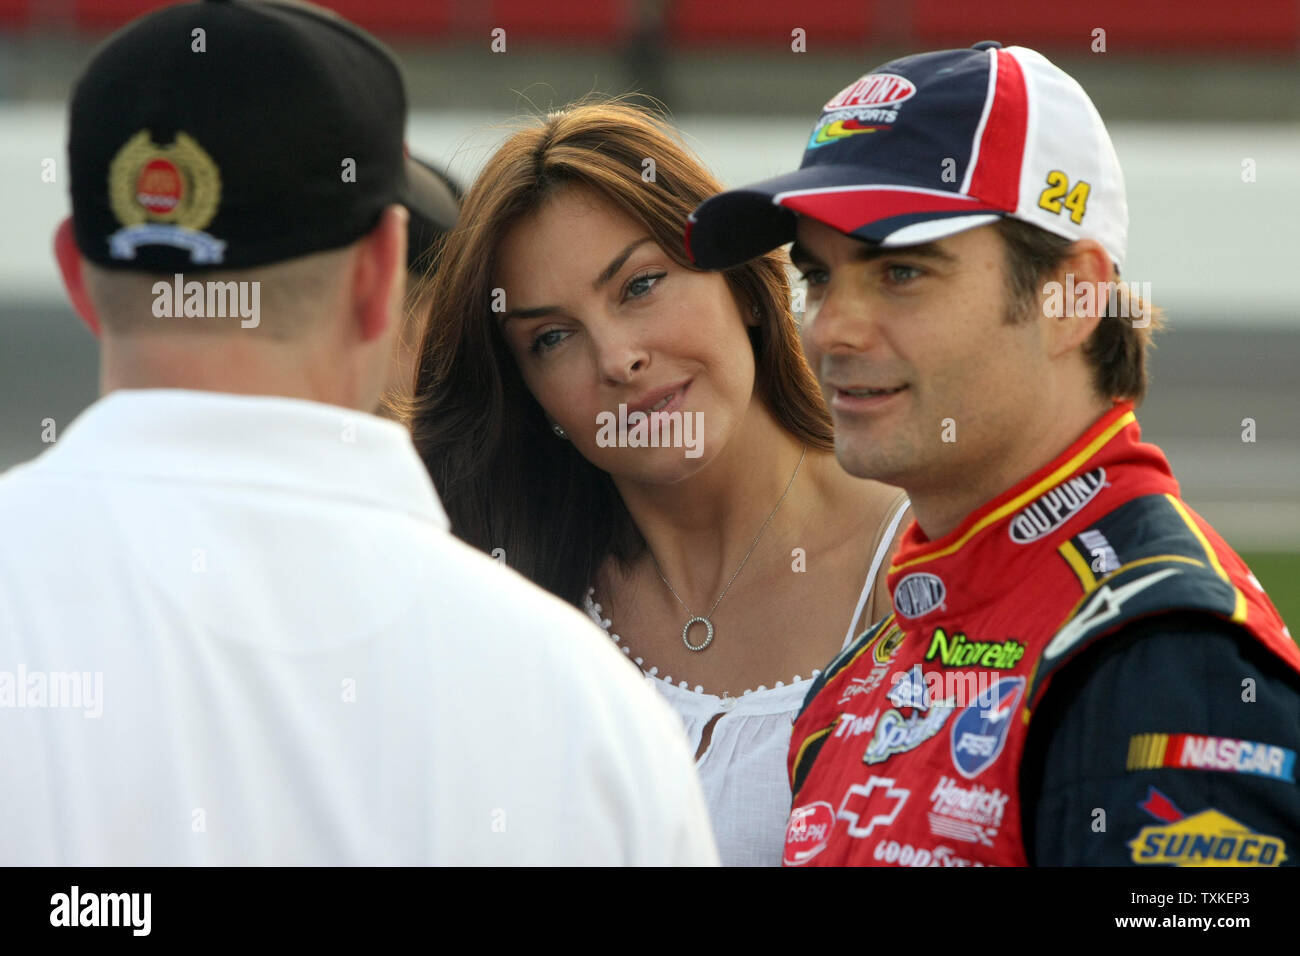 Ingrid Vandebosch Center Stands With Husband And Nascar Driver Jeff Gordon On Pit Road During Qualifying For The Coca Cola 600 Race At Lowe S Motor Speedway In Concord North Carolina On May 22